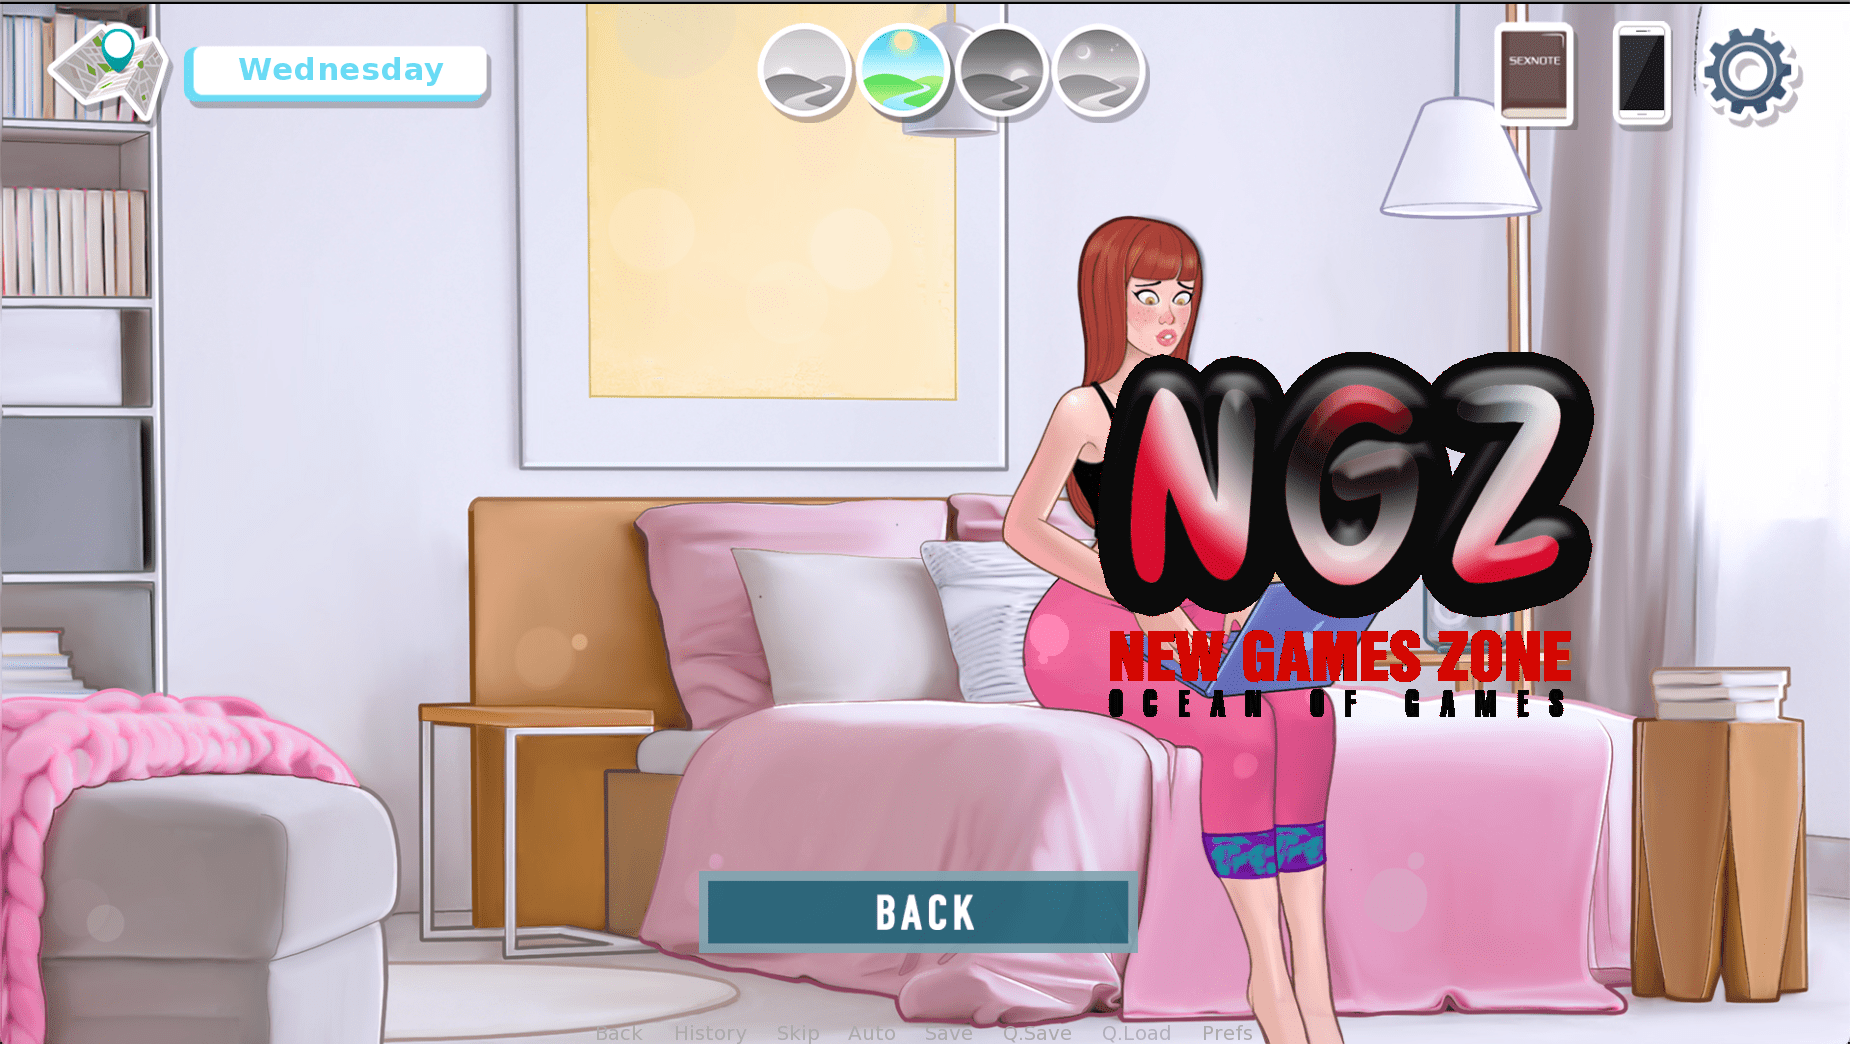 Sexnote Free Download Full Version Pc Game Crack